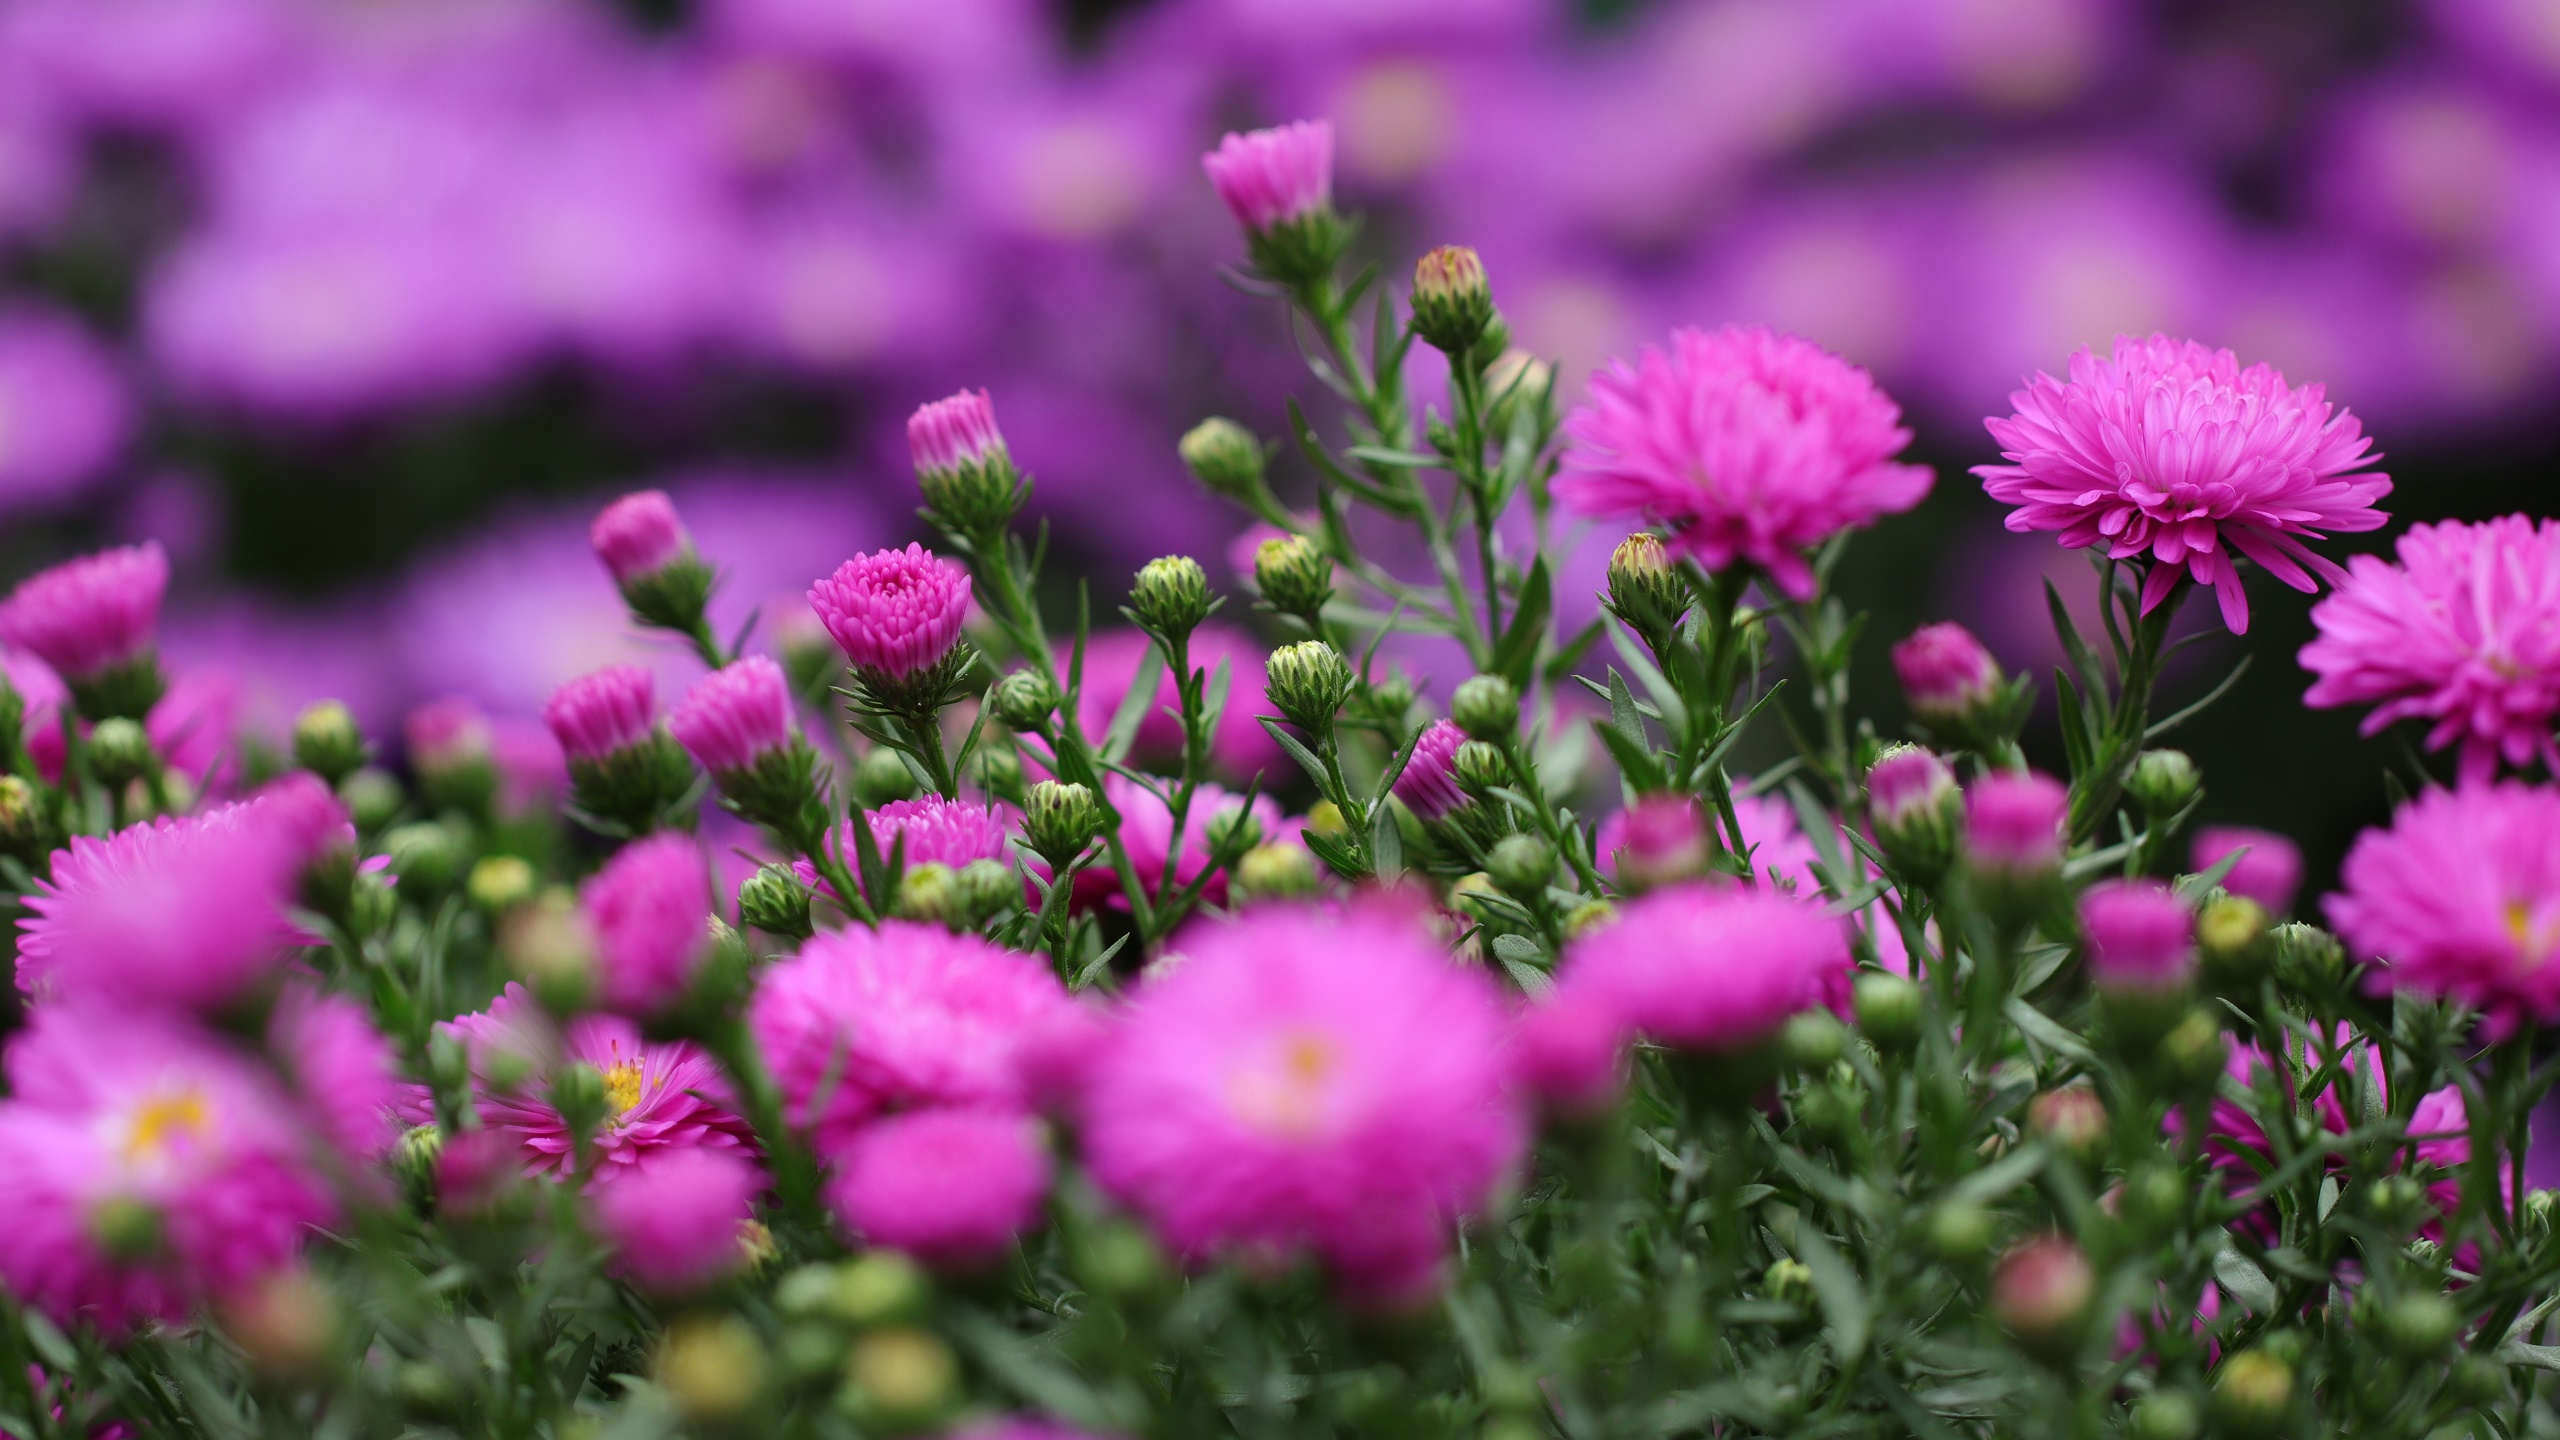 General 2560x1440 colorful flowers plants bokeh nature photography